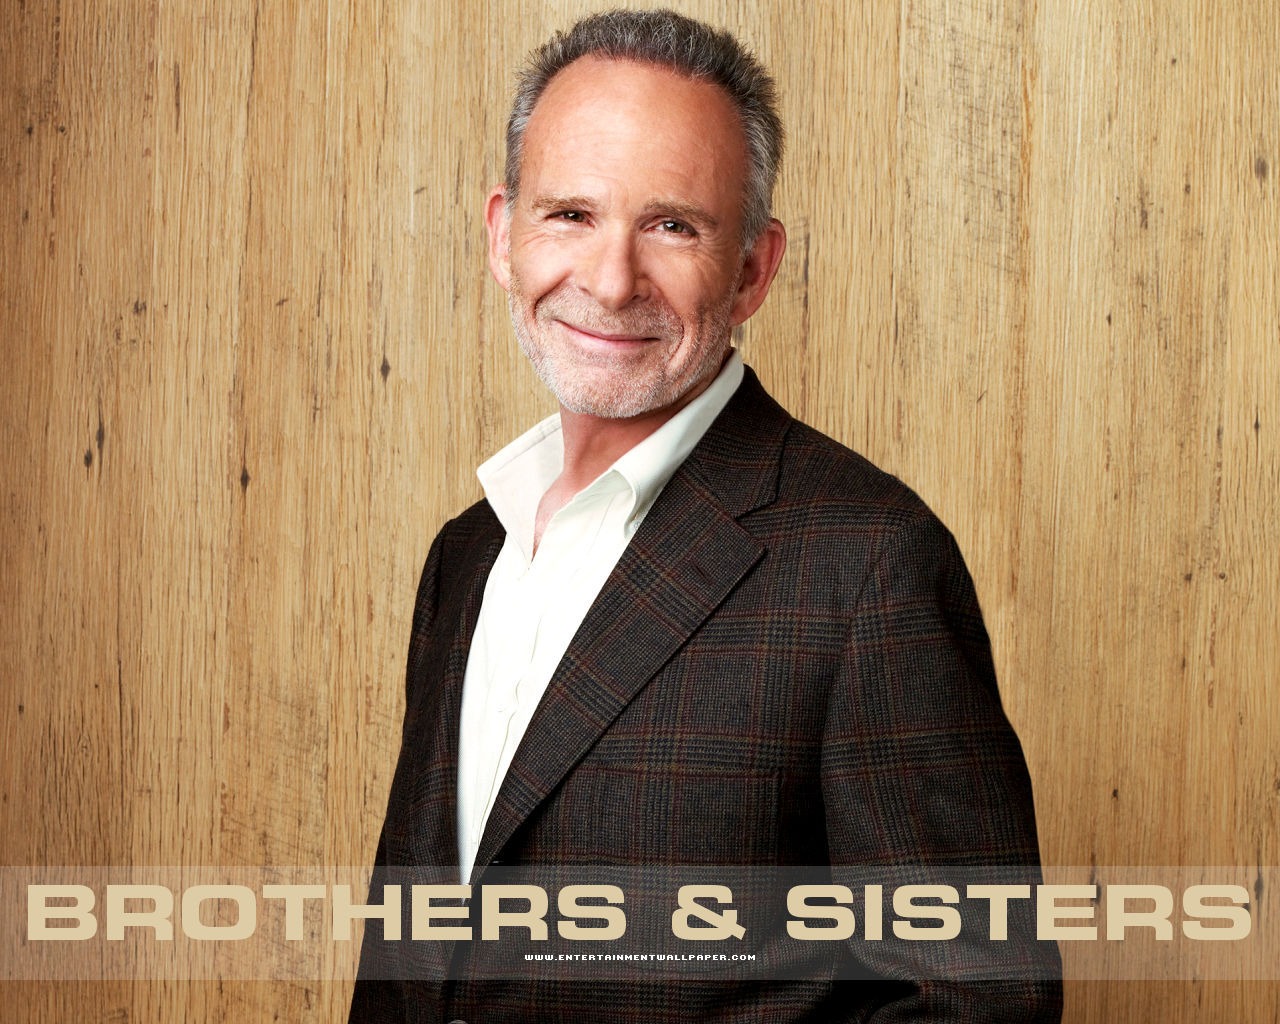 Brothers & Sisters 兄弟姐妹21 - 1280x1024